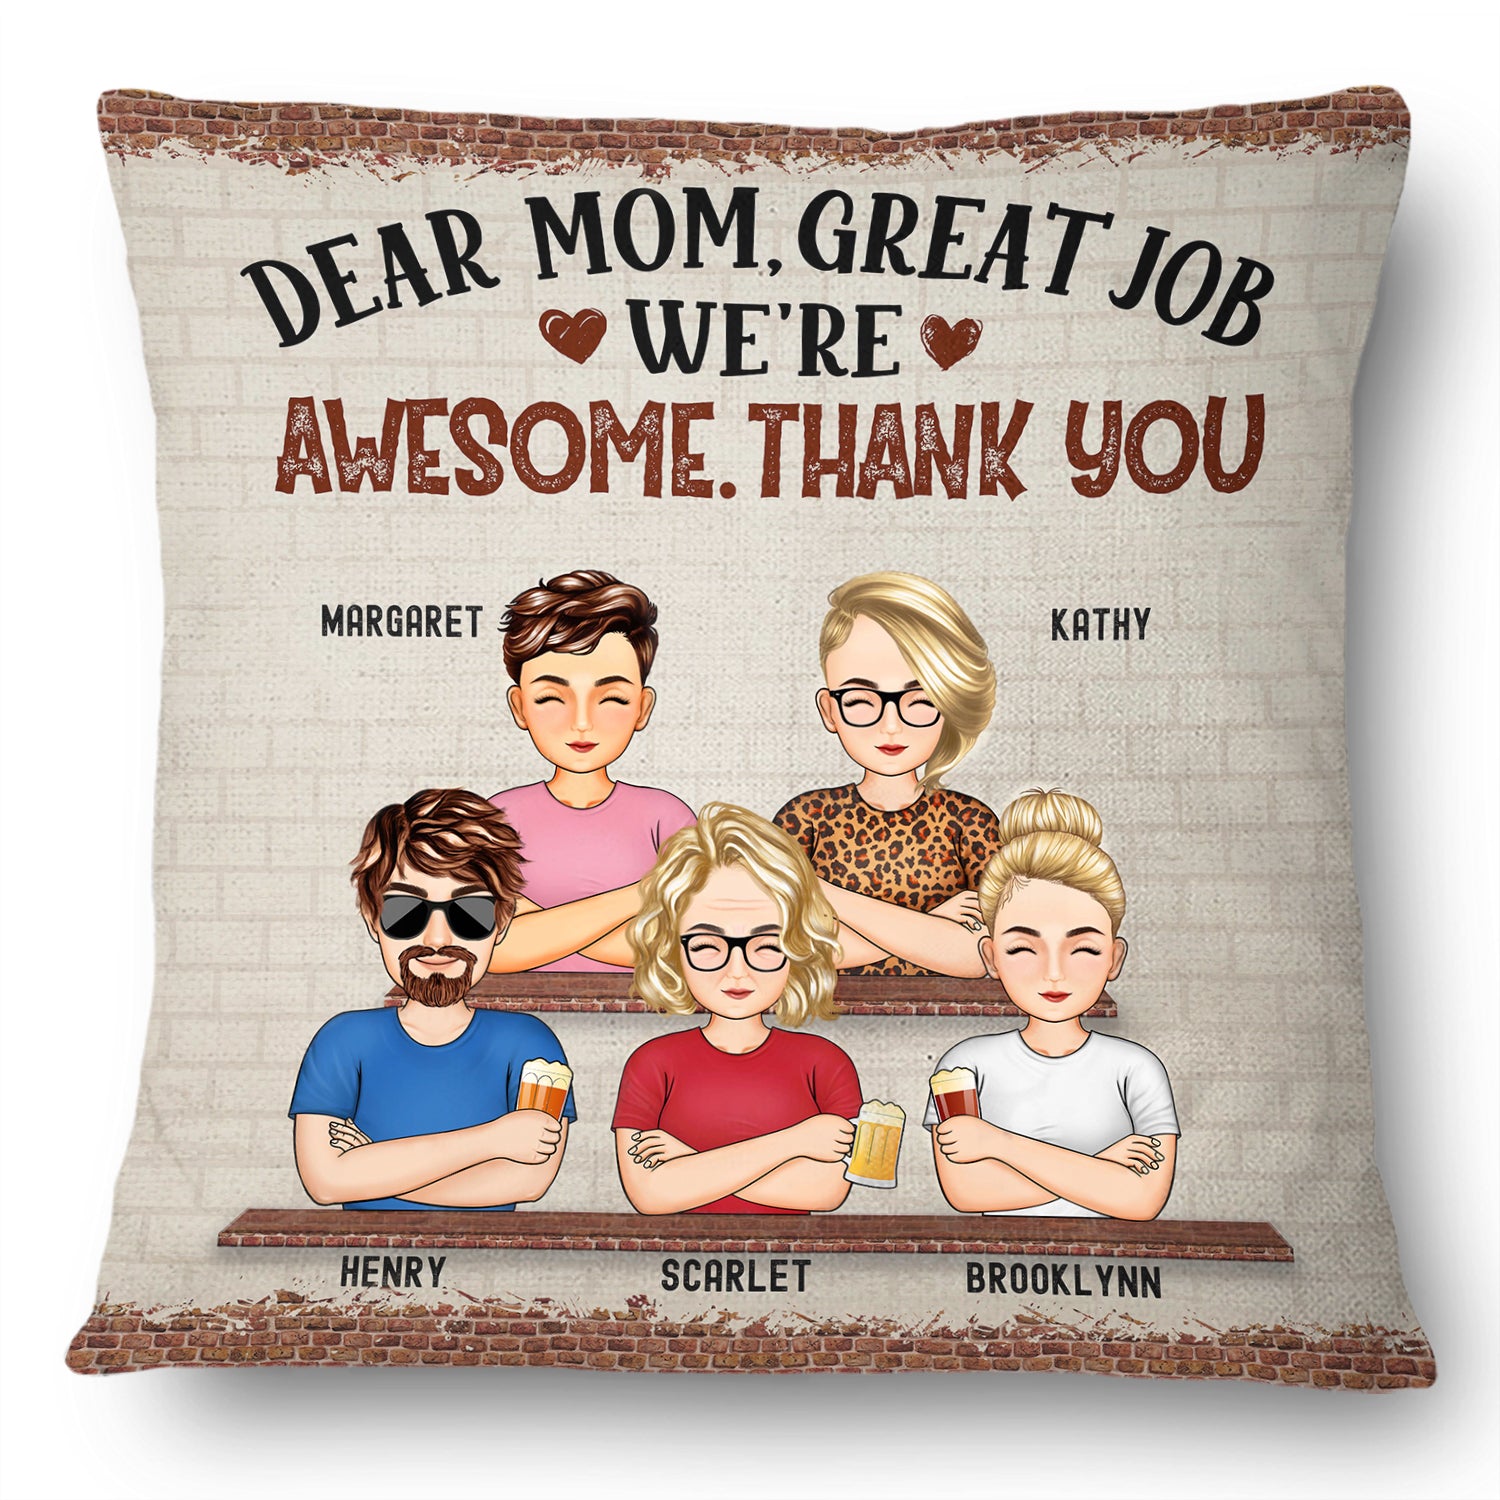 Dear Mom Great Job We're Awesome Thank You - Birthday, Loving Gift For Mommy, Mother, Grandma, Grandmother - Personalized Custom Pillow